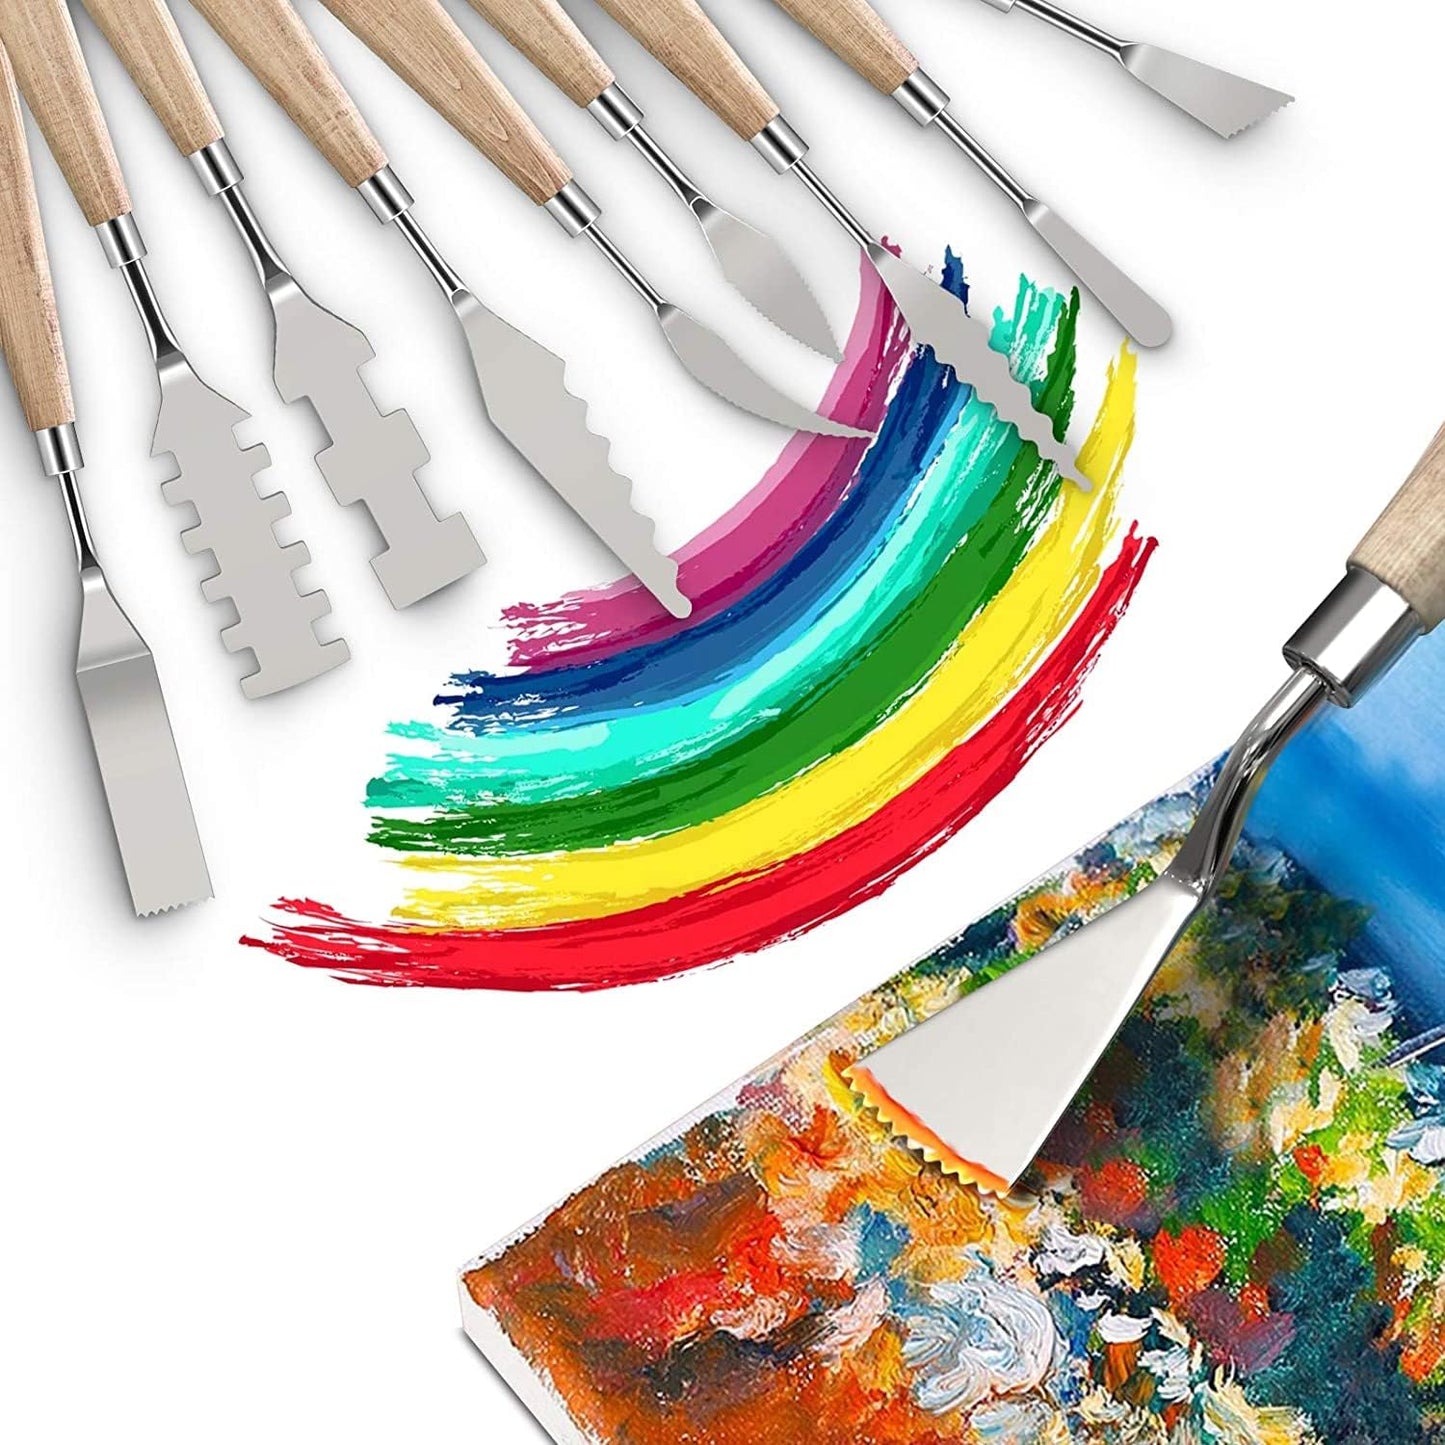 Satyam's 10 Pieces Painting Knives with Wood Grip Handle Stainless Steel Palette Knife Set Oil Painting Metal Knives Color Mixing Scraper Painting Art